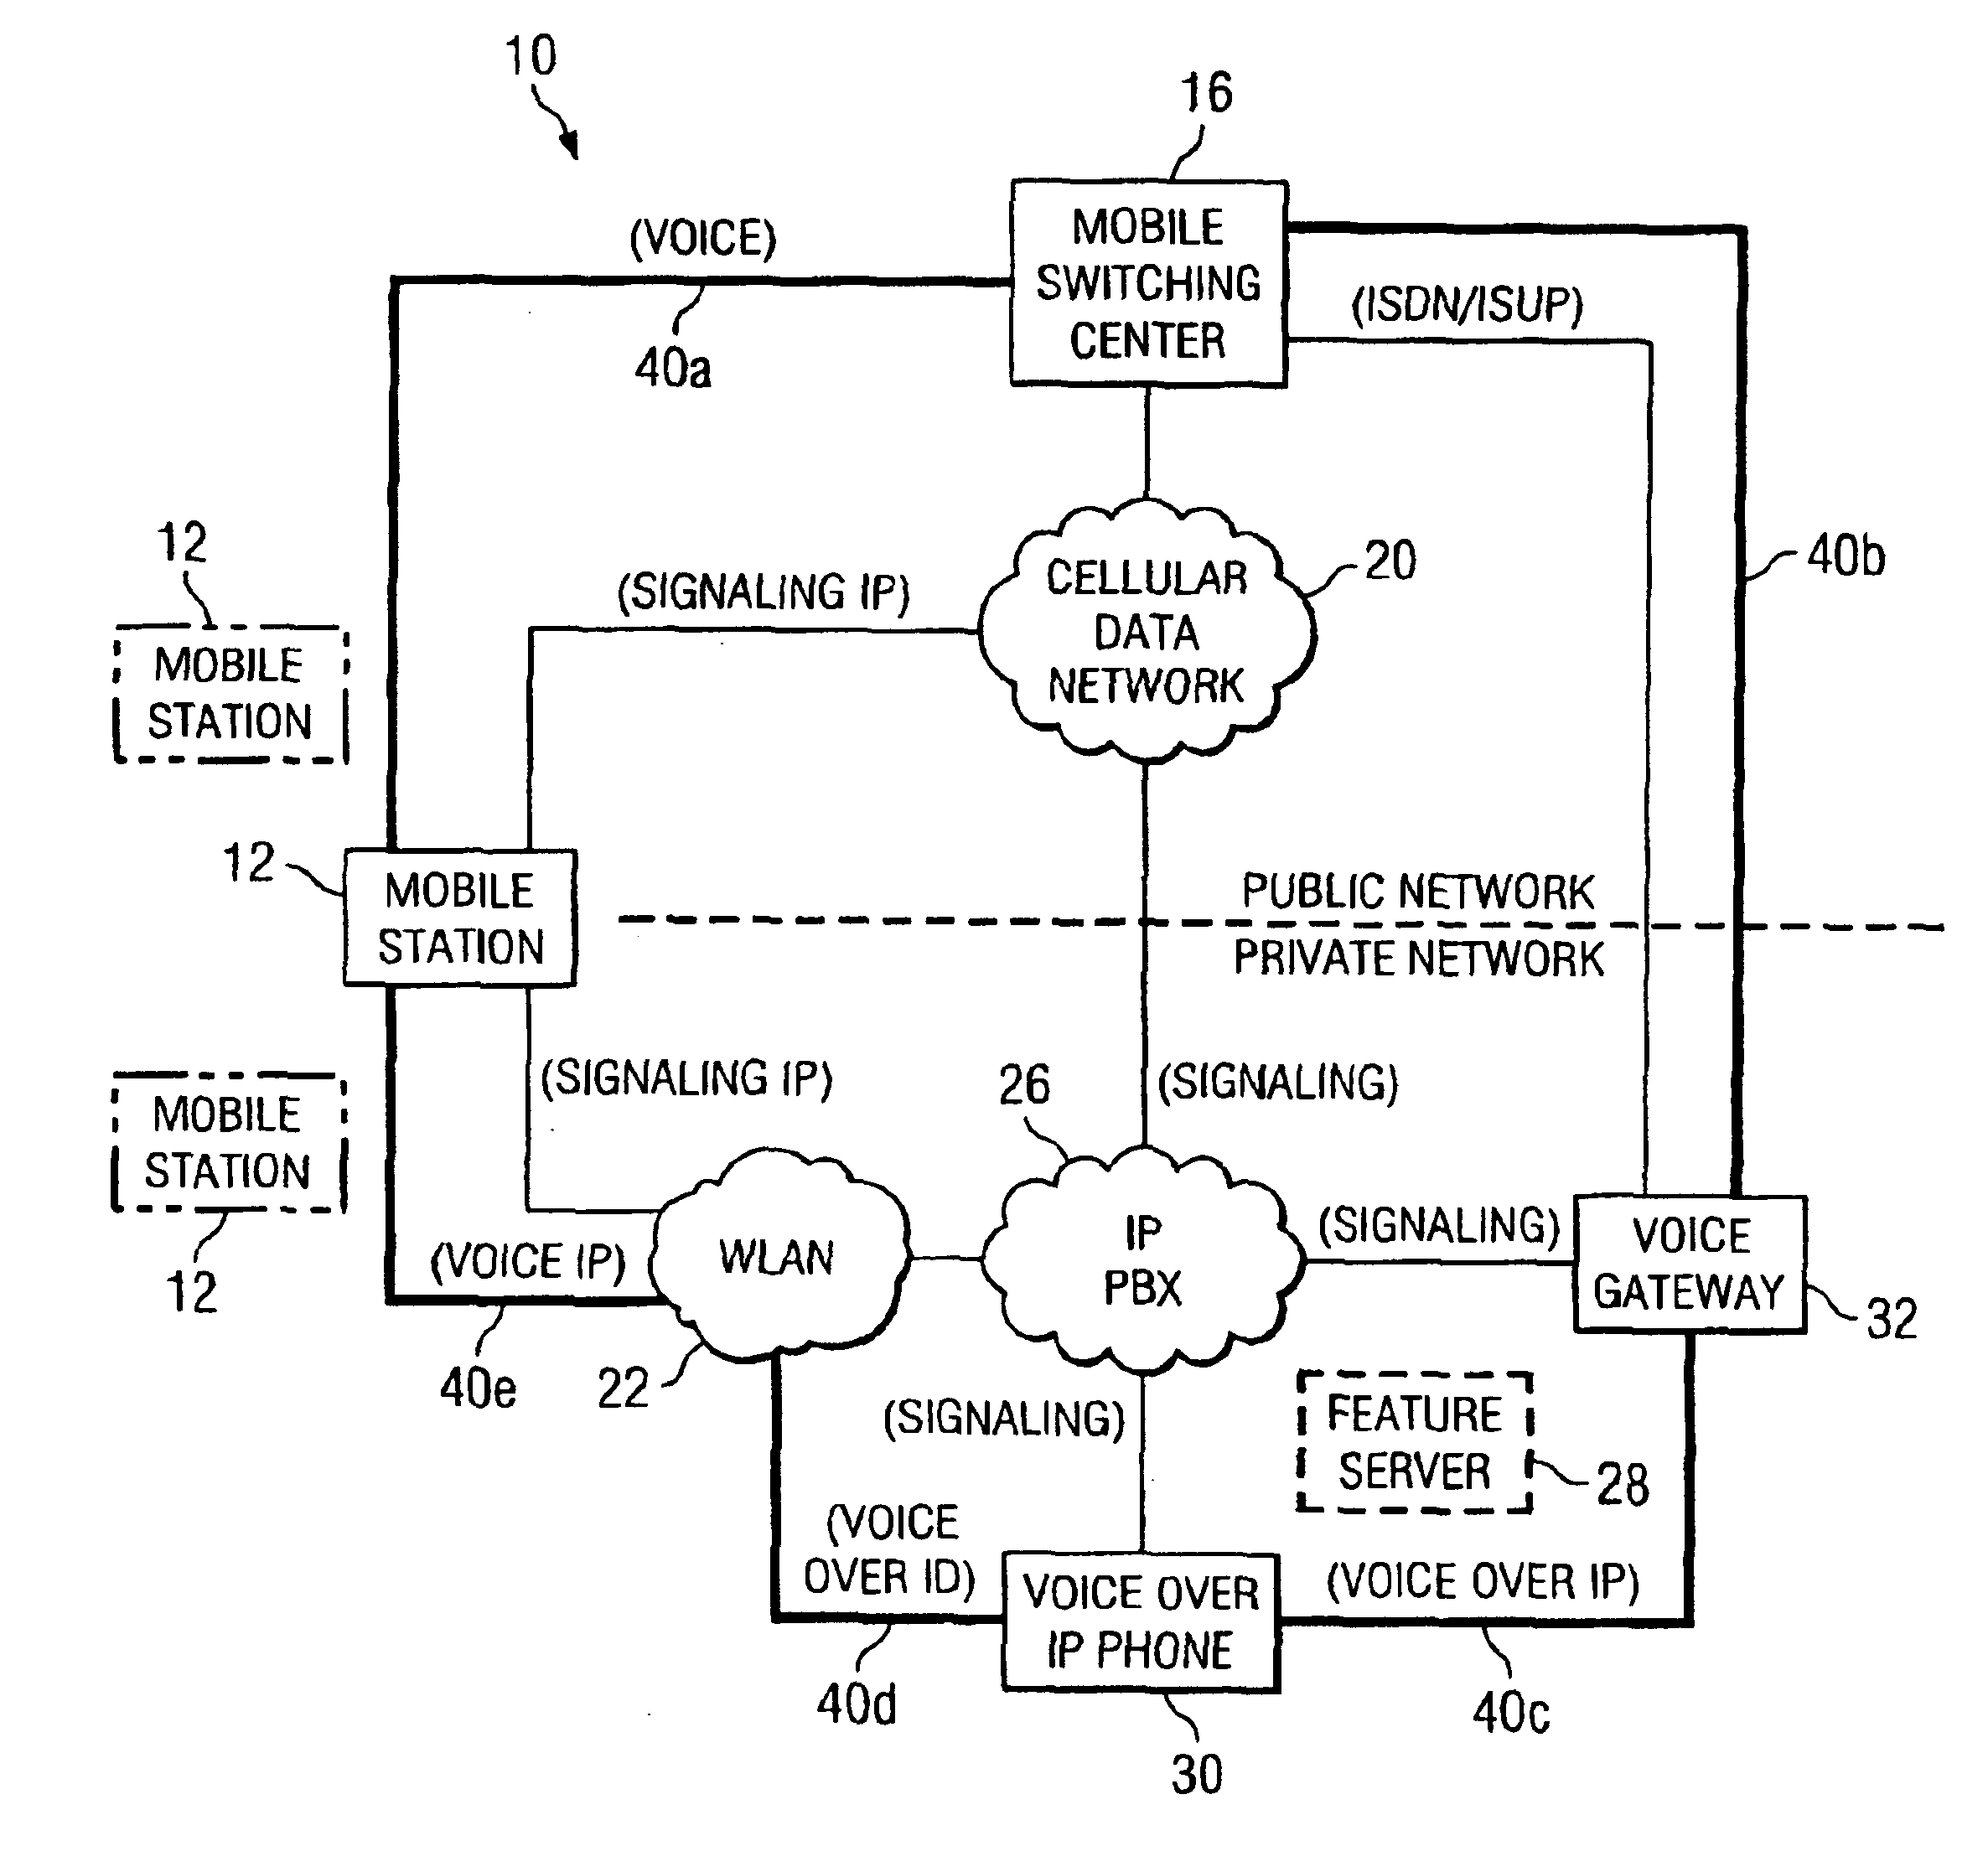 System and method for providing transparency in delivering private network features